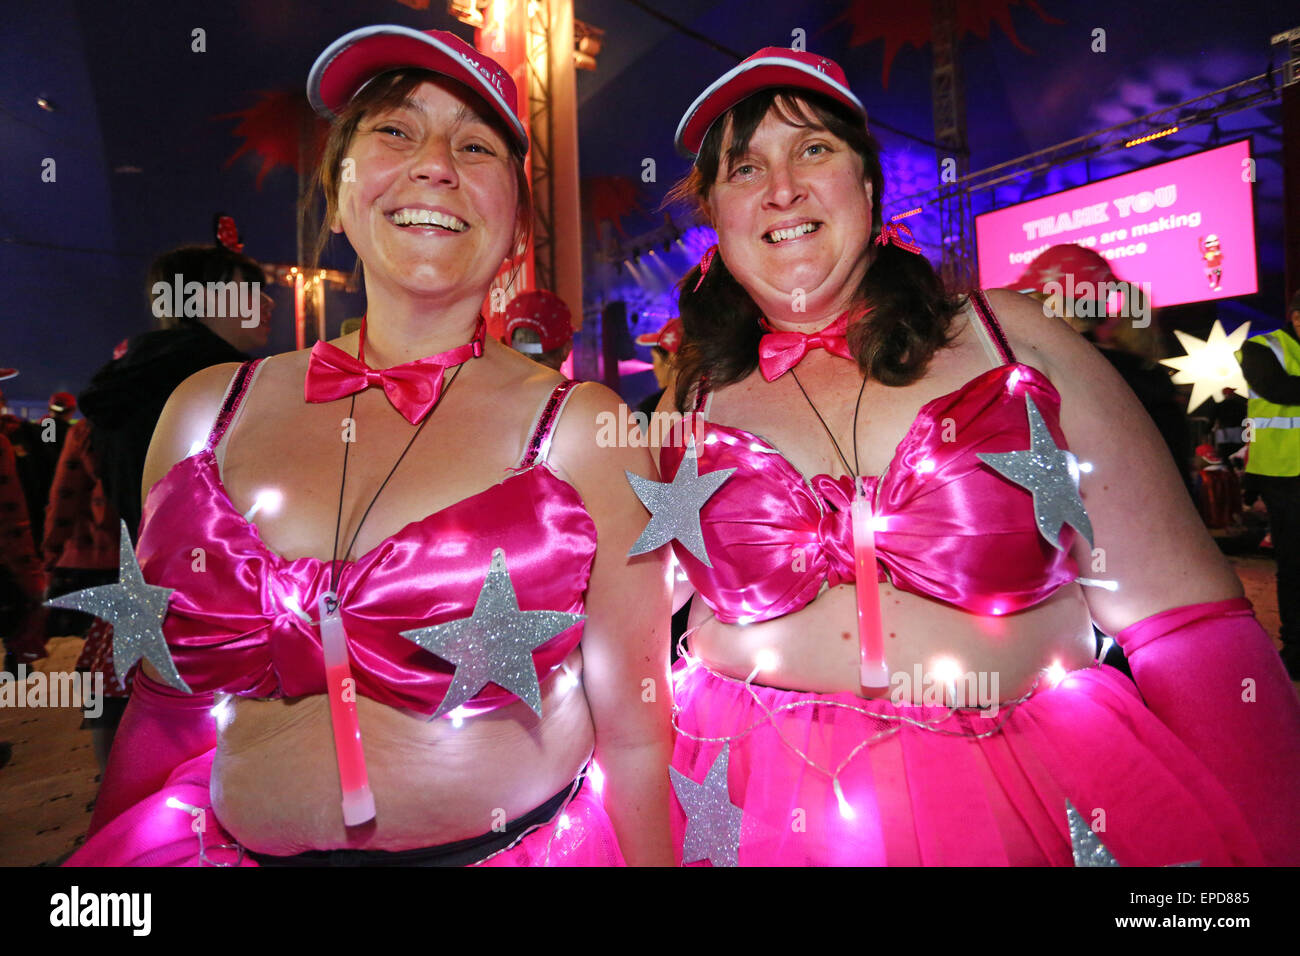 https://c8.alamy.com/comp/EPD885/london-uk-16th-may-2015-participants-with-illuminated-bras-at-the-EPD885.jpg